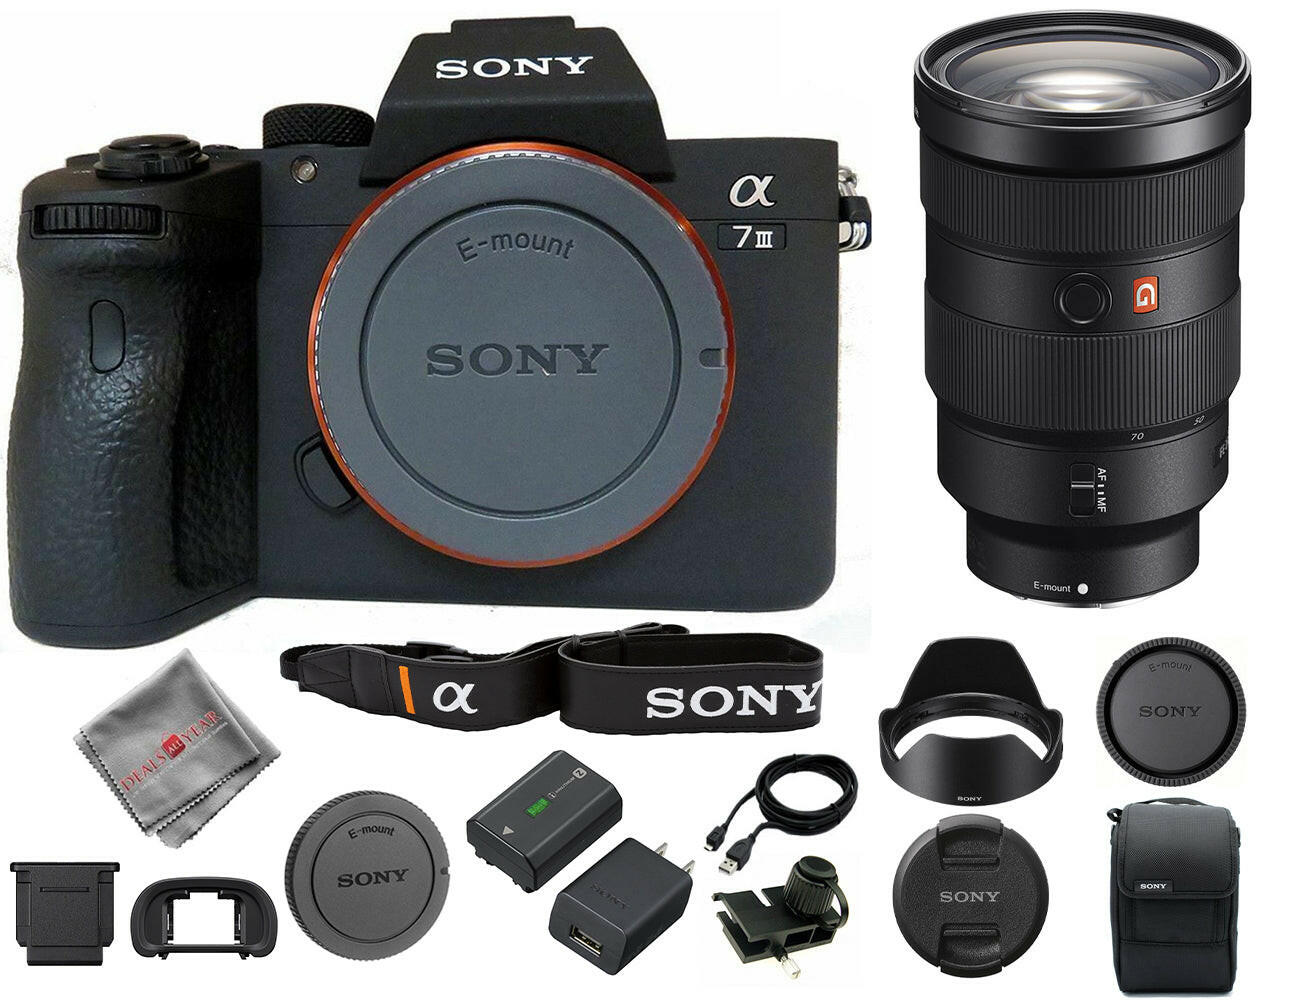 Sony a7 III Mirrorless Camera with 24-70mm f/2.8 Lens and